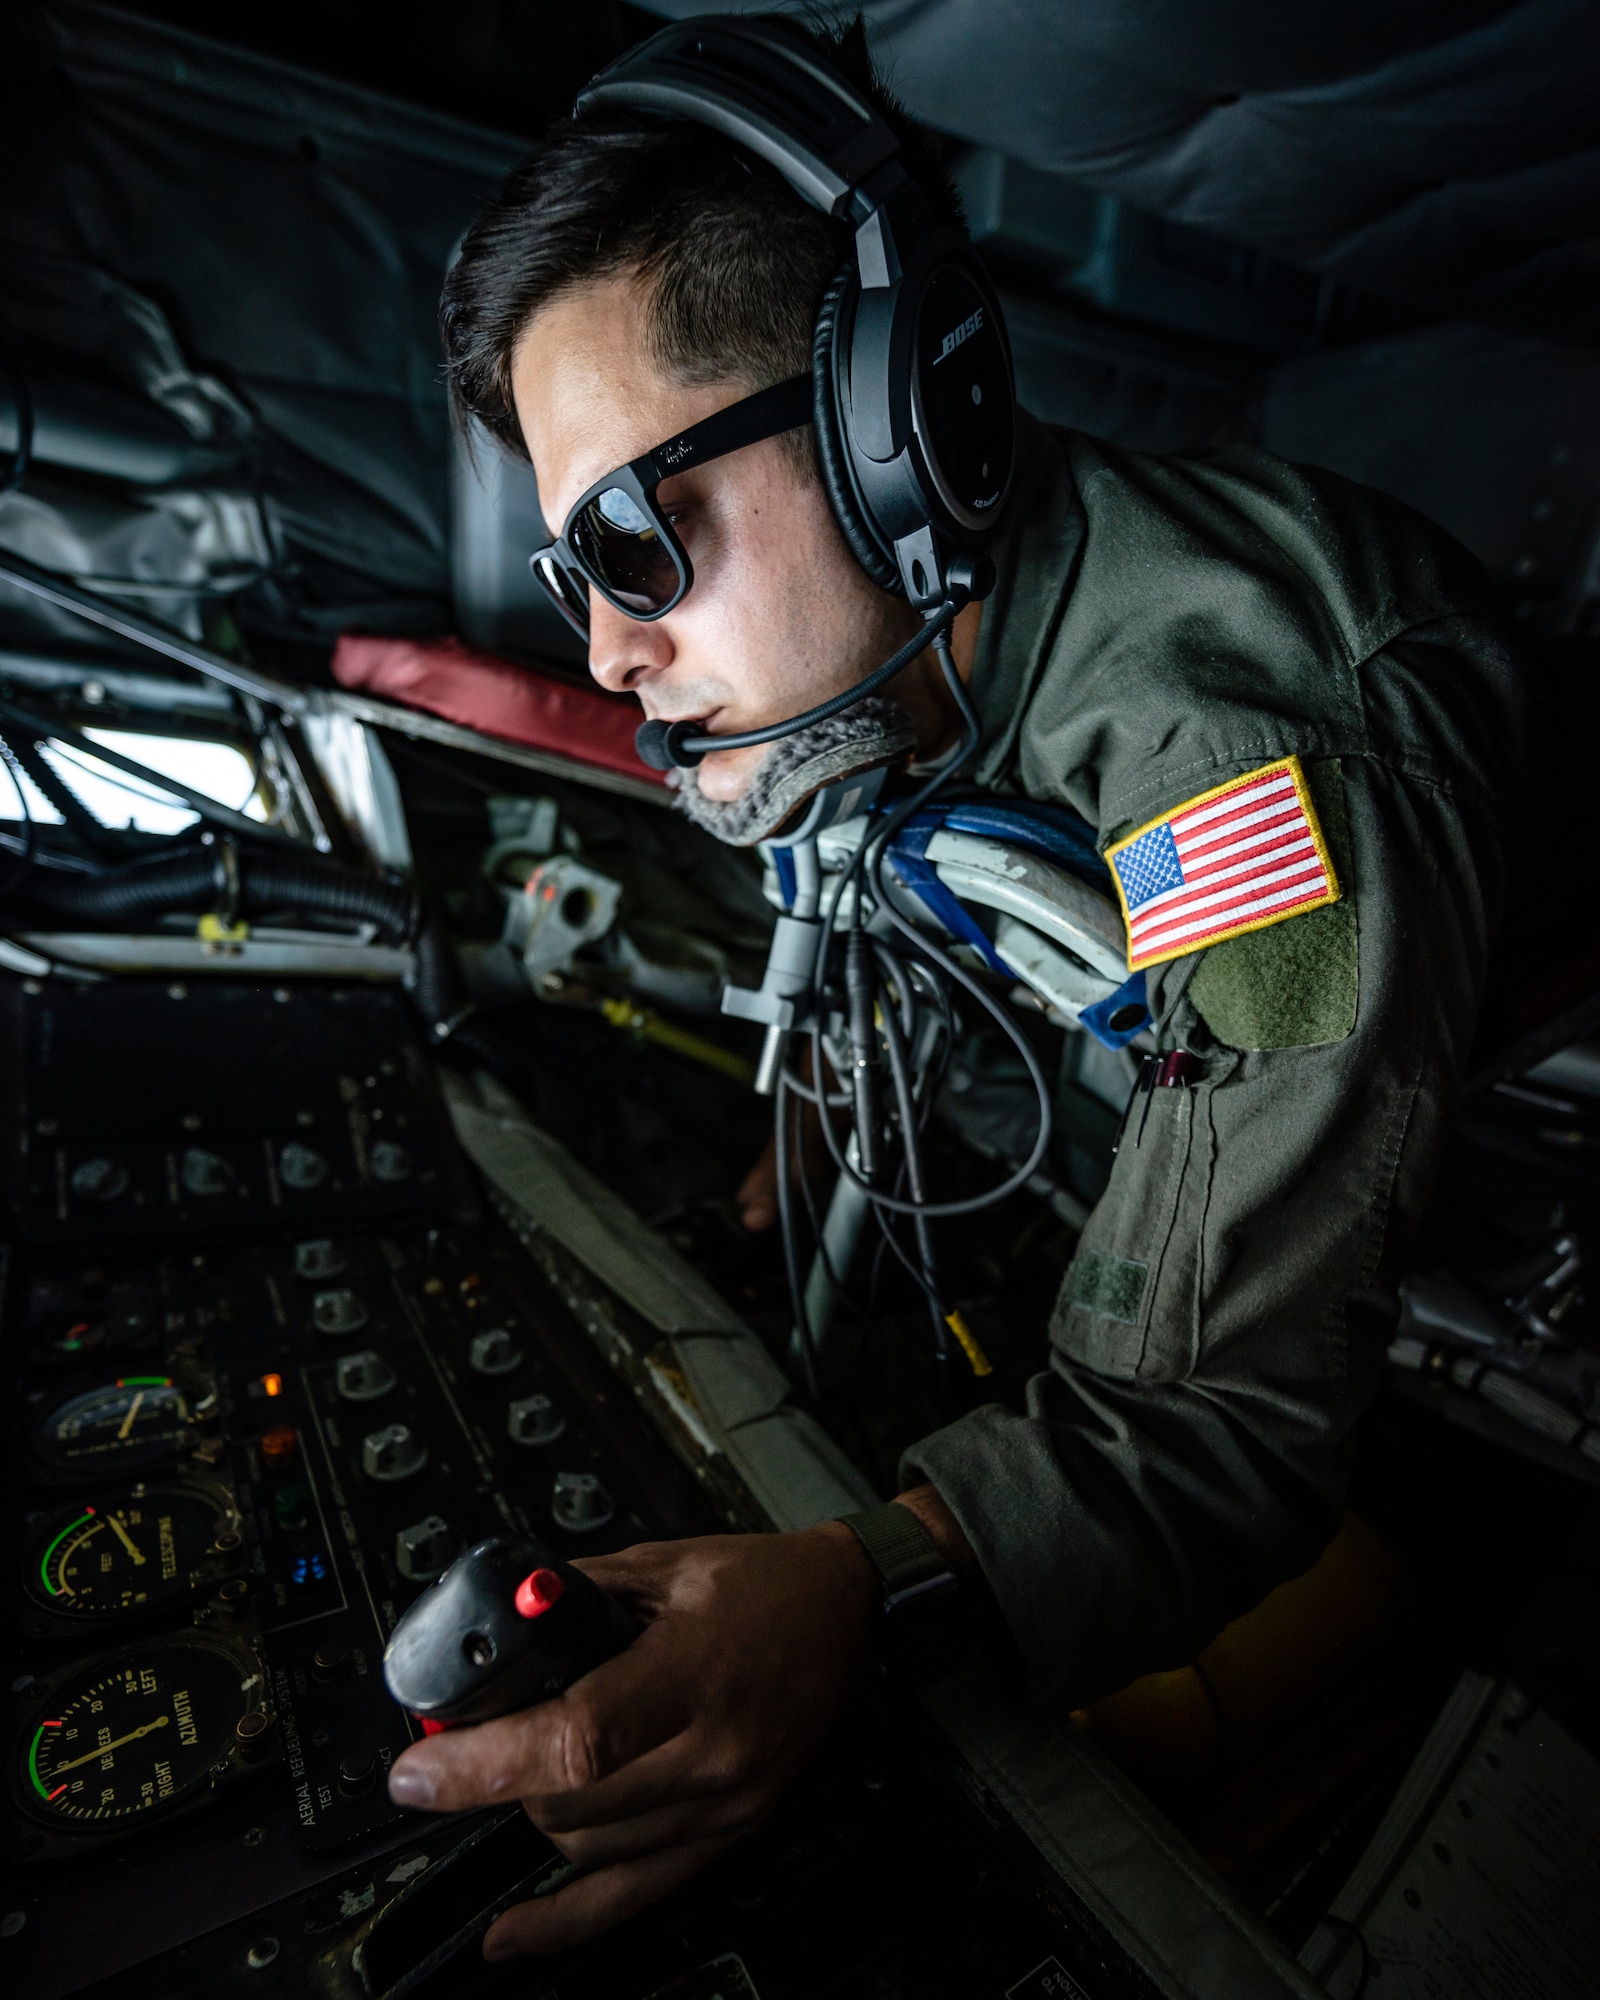 U.S. Air National Guard Senior Airman Dmitri Davila, 155th Air Refueling Wing in-flight refueling technician, operates the boom during an in-flight refuel of a German air force PA-200 Tornado during exercise Ample Strike 2019.